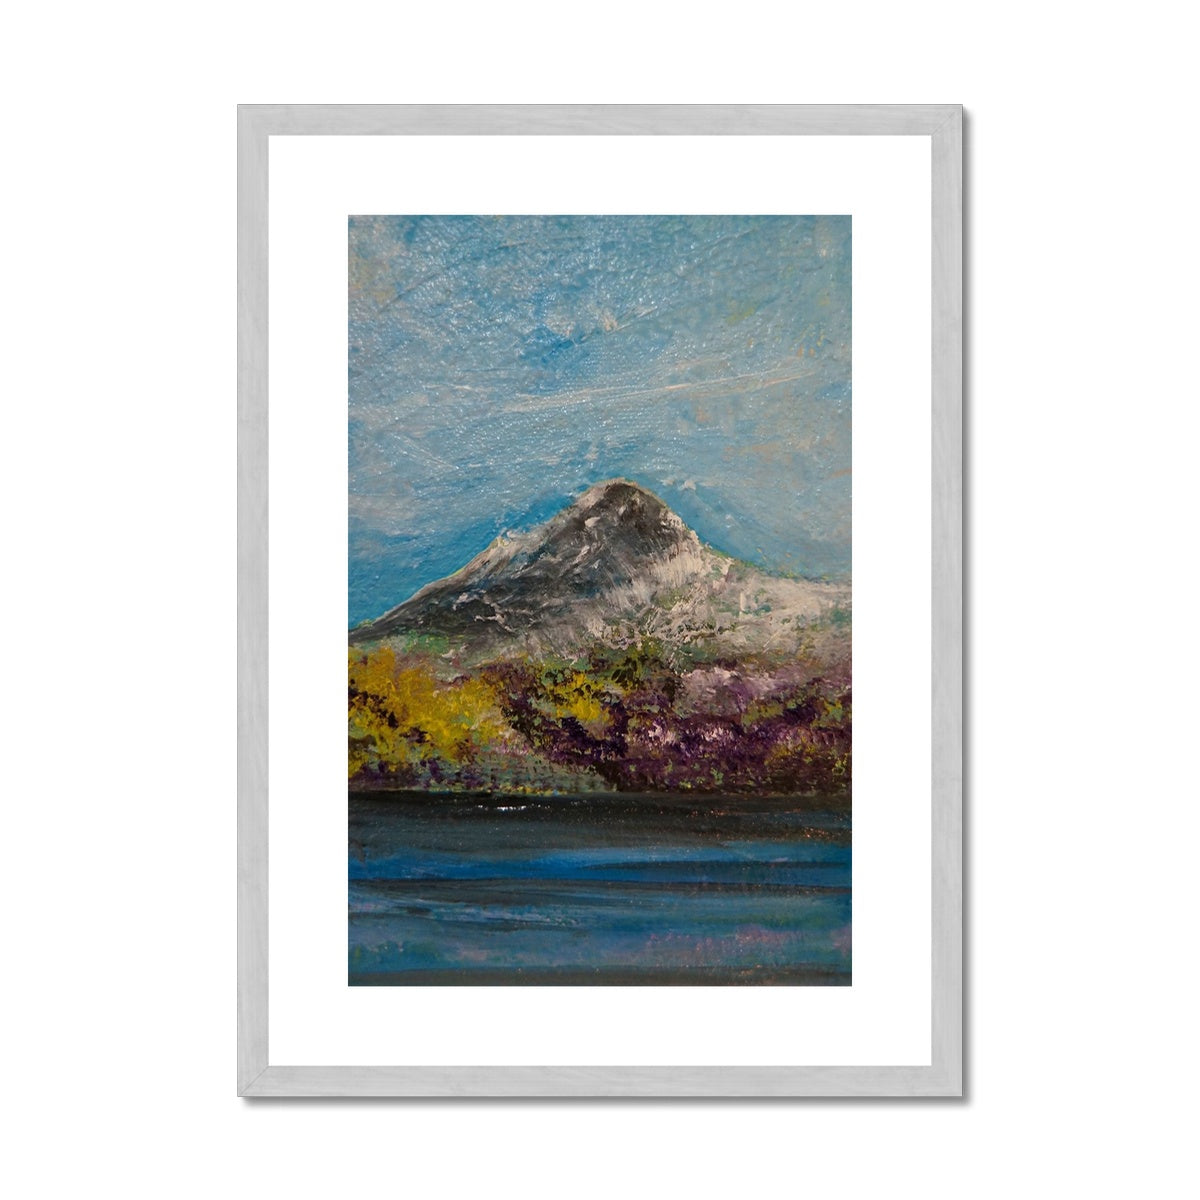 Ben Lomond ii Painting | Antique Framed & Mounted Prints From Scotland-Antique Framed & Mounted Prints-Scottish Lochs & Mountains Art Gallery-A2 Portrait-Silver Frame-Paintings, Prints, Homeware, Art Gifts From Scotland By Scottish Artist Kevin Hunter